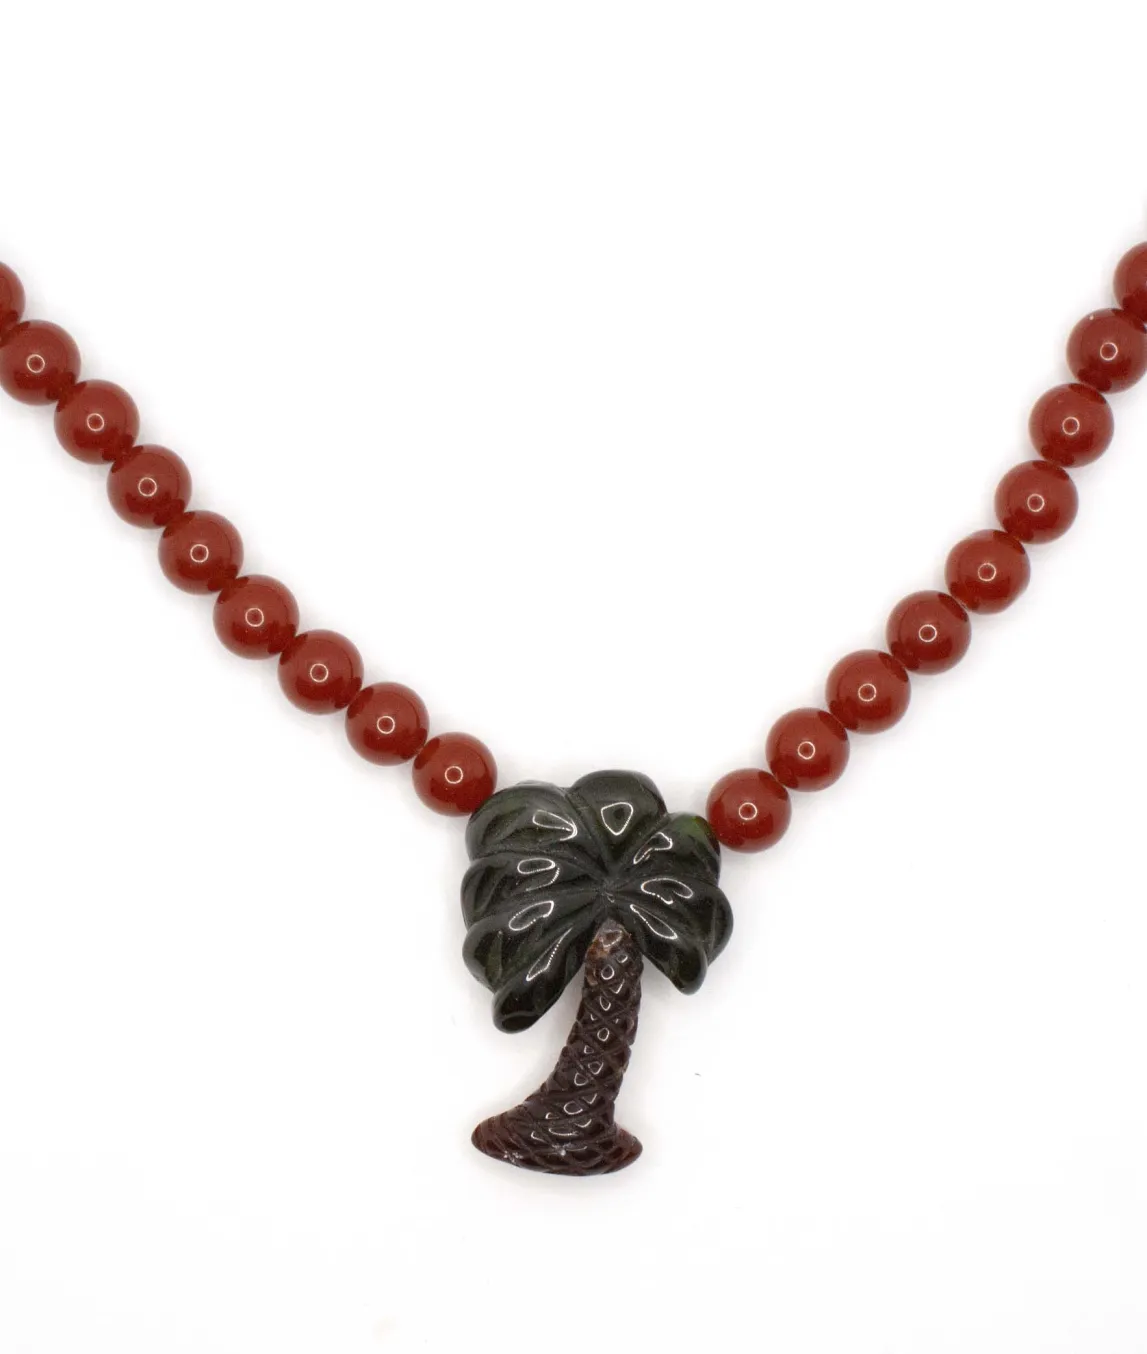 Carved palm tree pendant green with brown trunk on beaded necklace